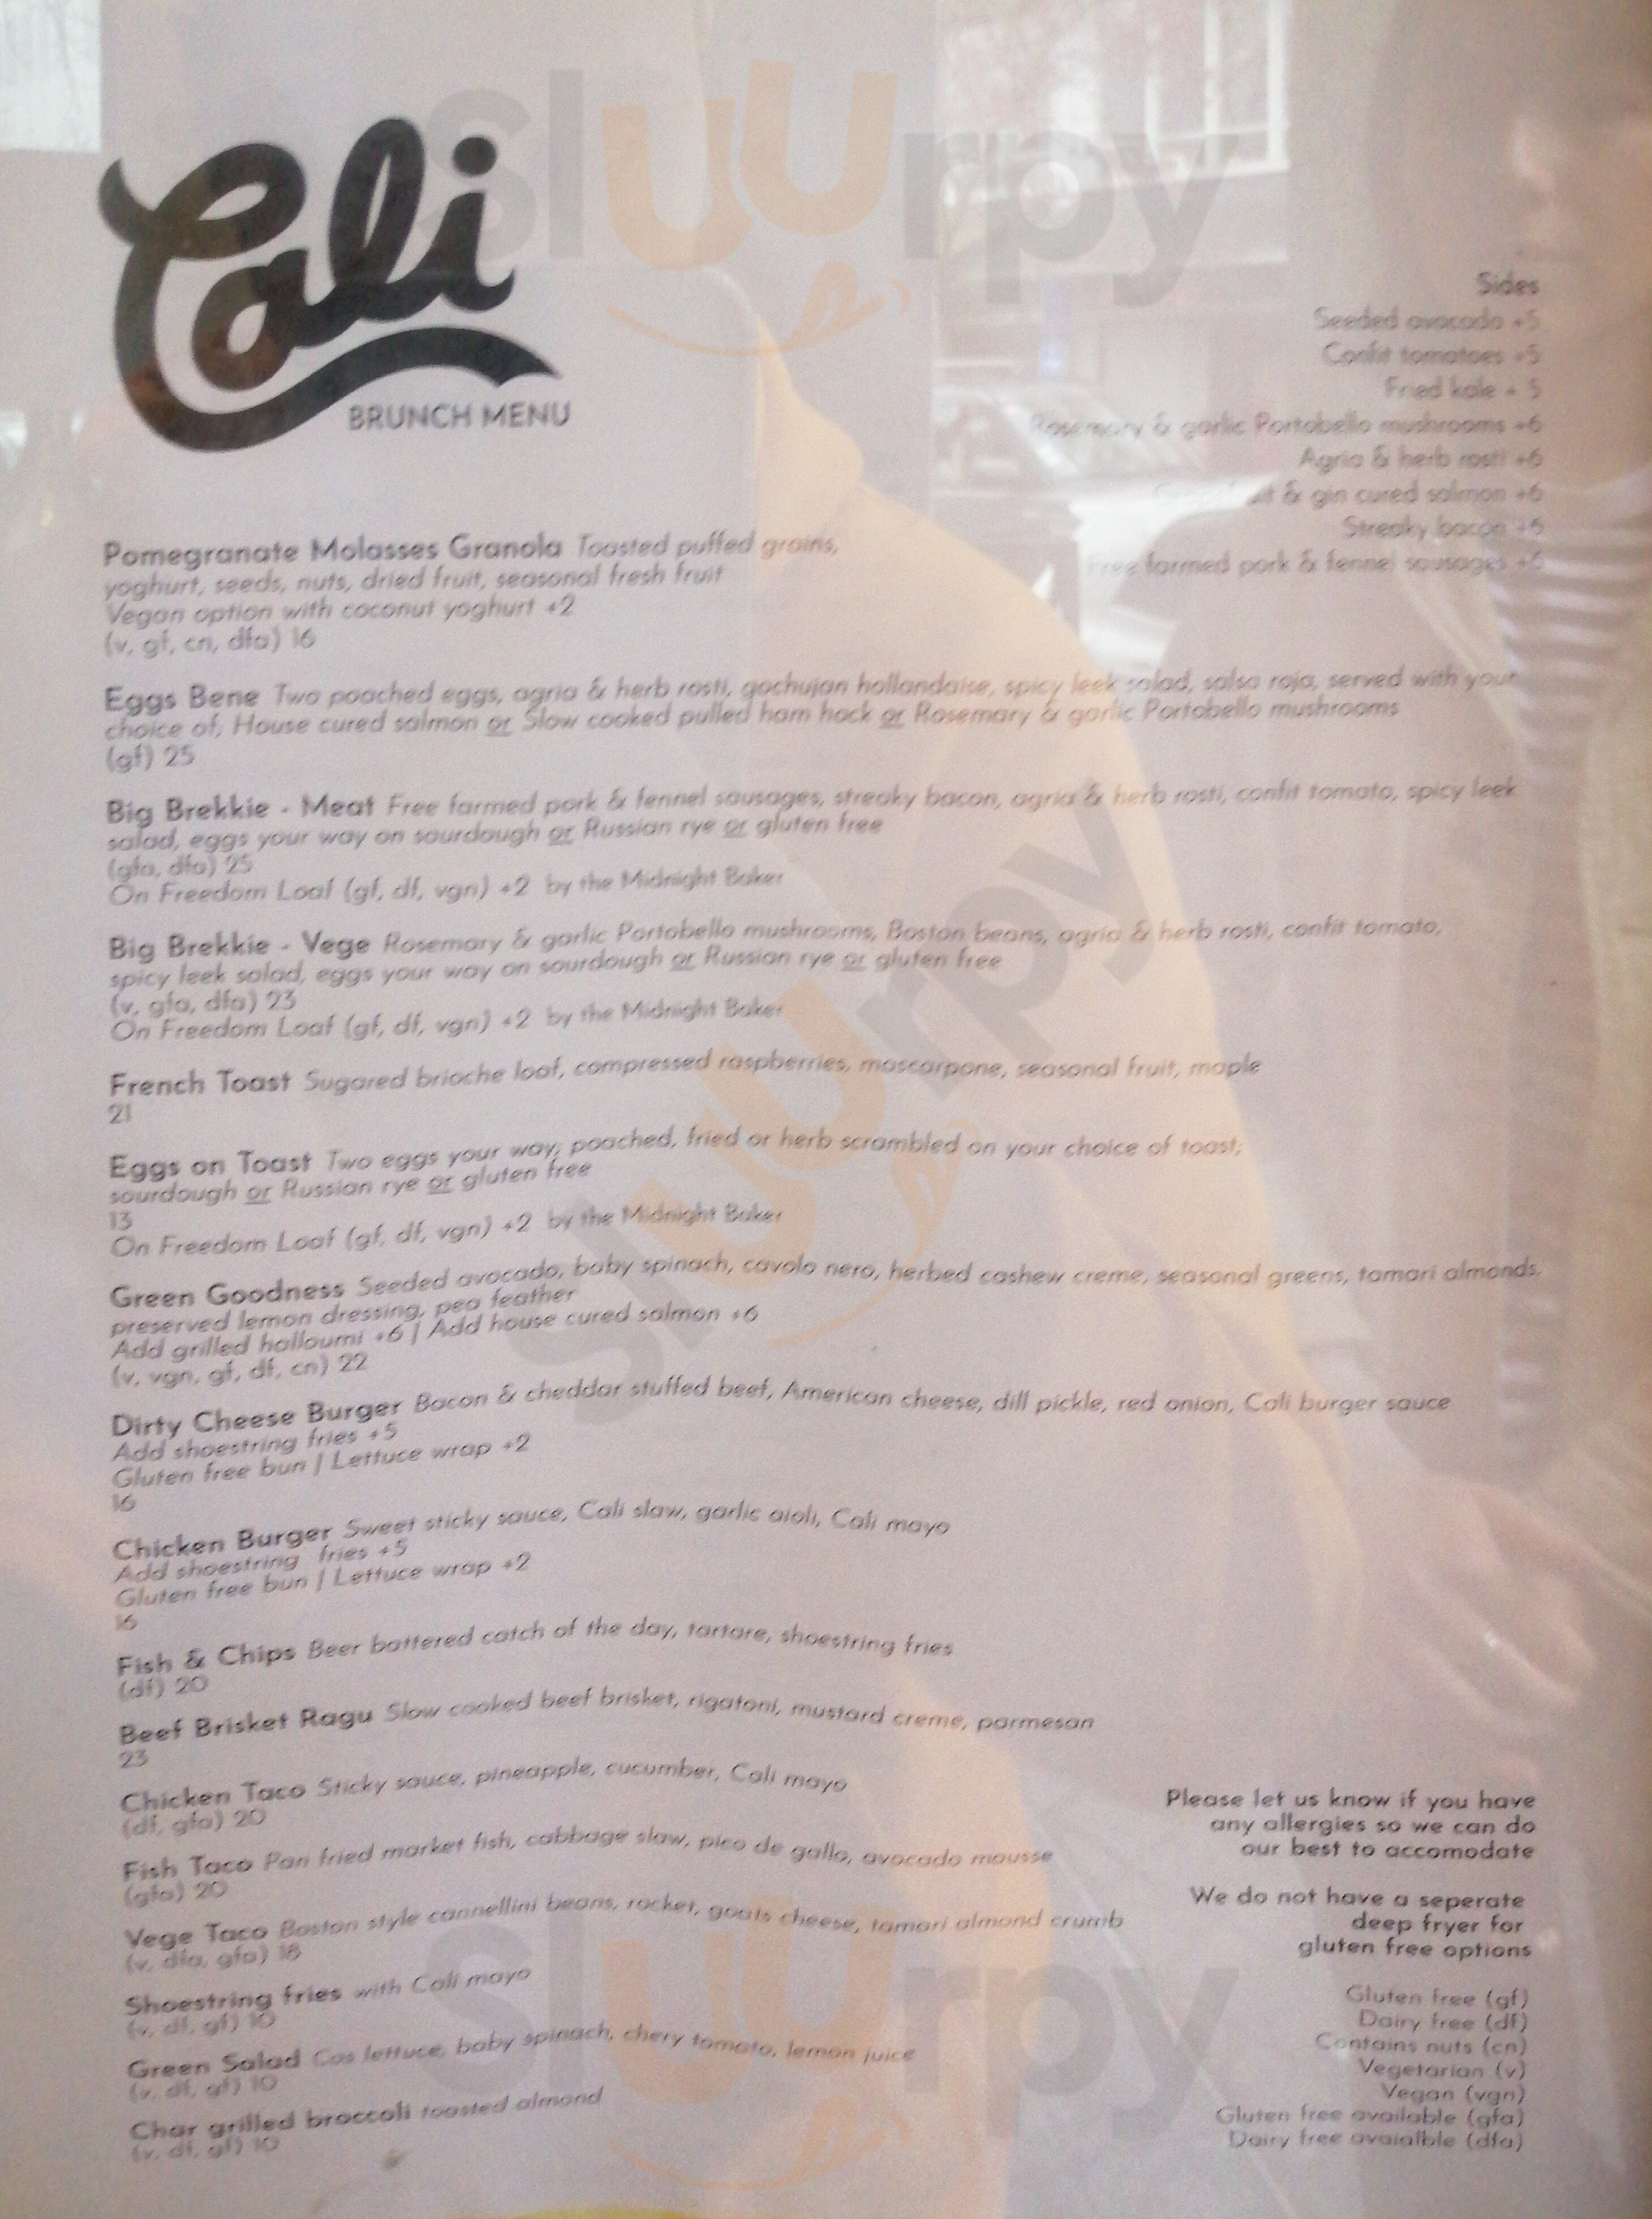 Cali - All Day Eatery Auckland Central Menu - 1